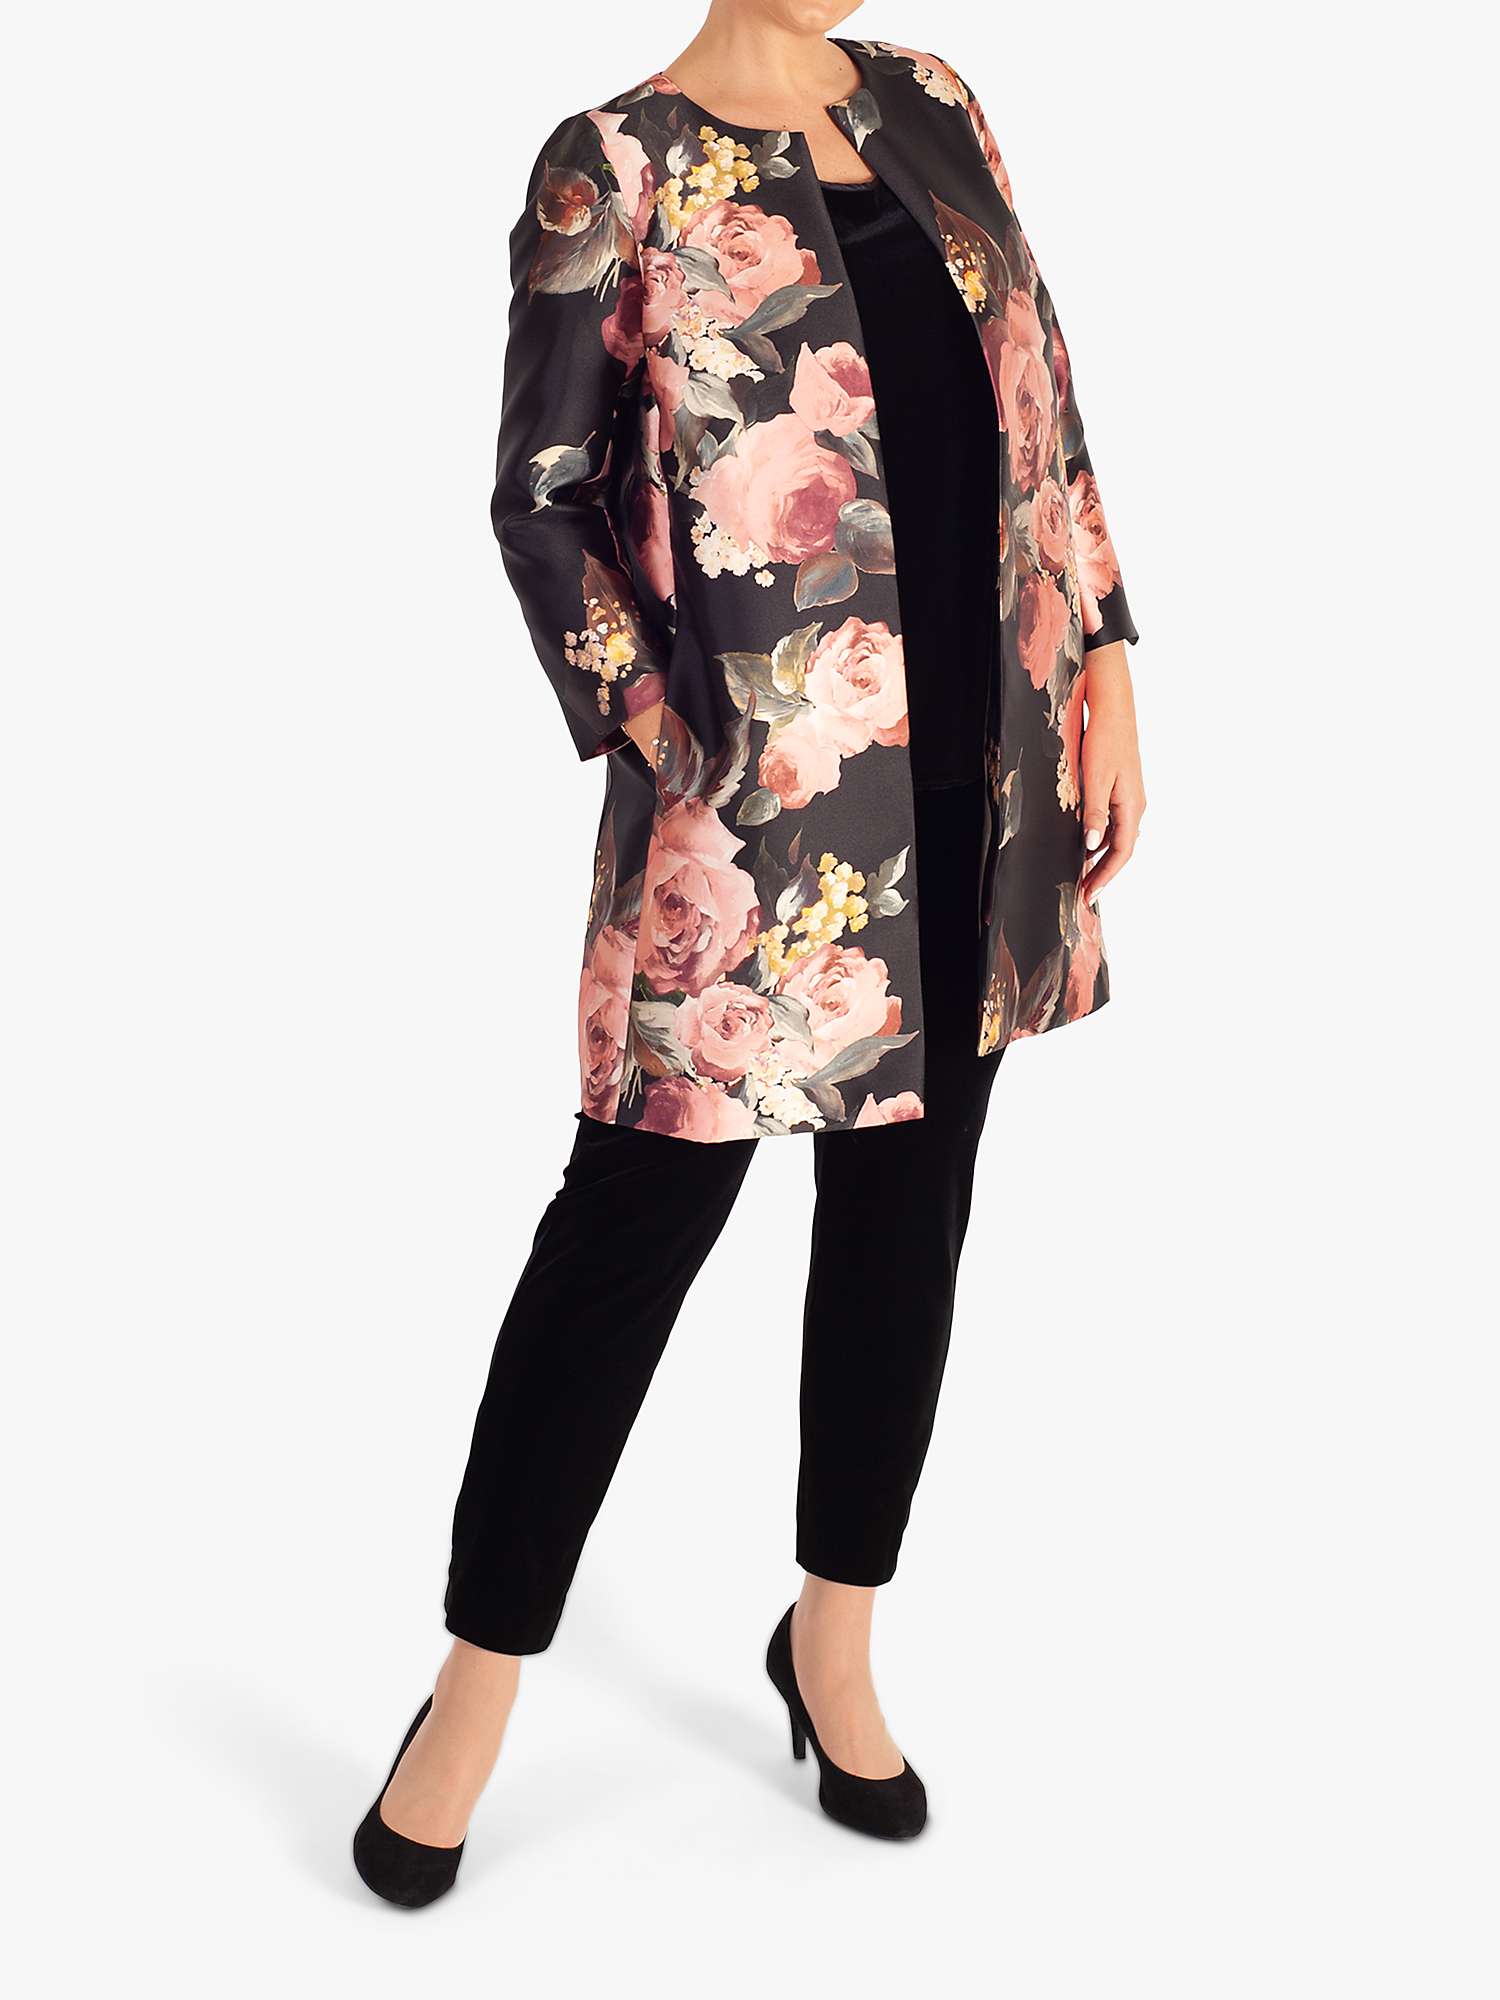 Buy chesca Satin Twill Floral Print Round Neck Coat, Black/Dusty Pink Online at johnlewis.com